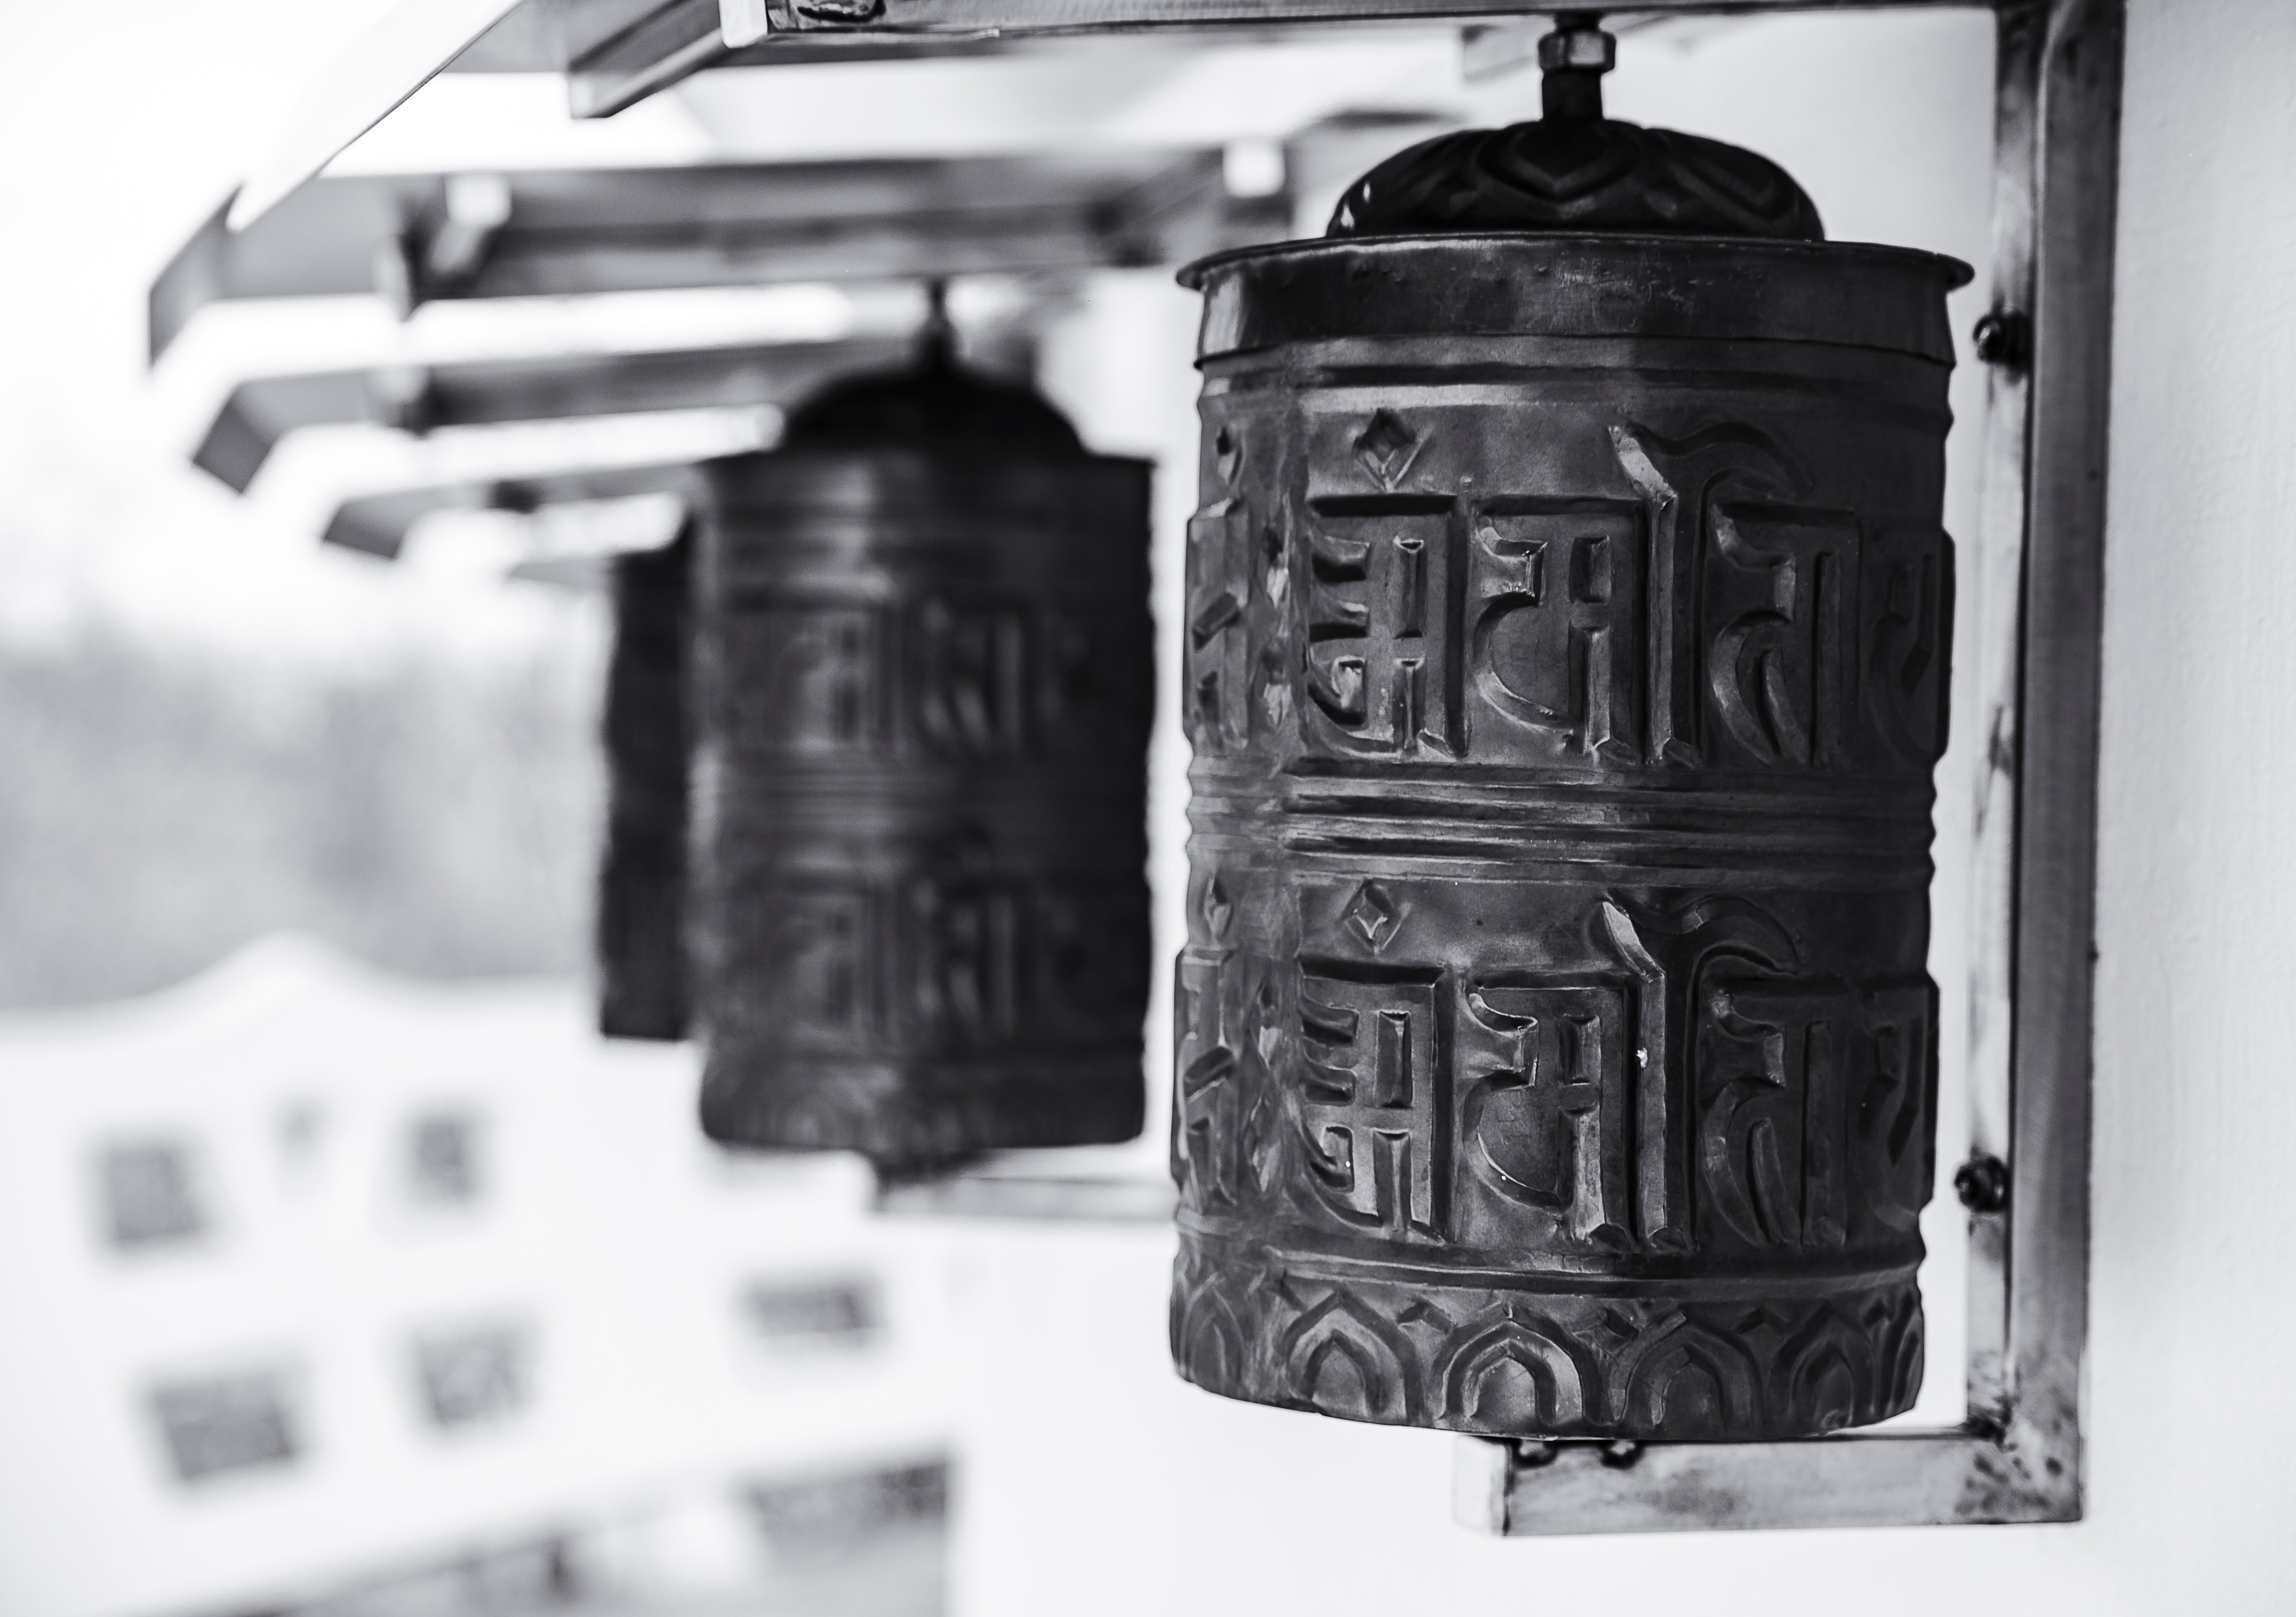 Black Steel Bells in Shallow Photography, Ancient, Antique, Barrel, Black and white, HQ Photo